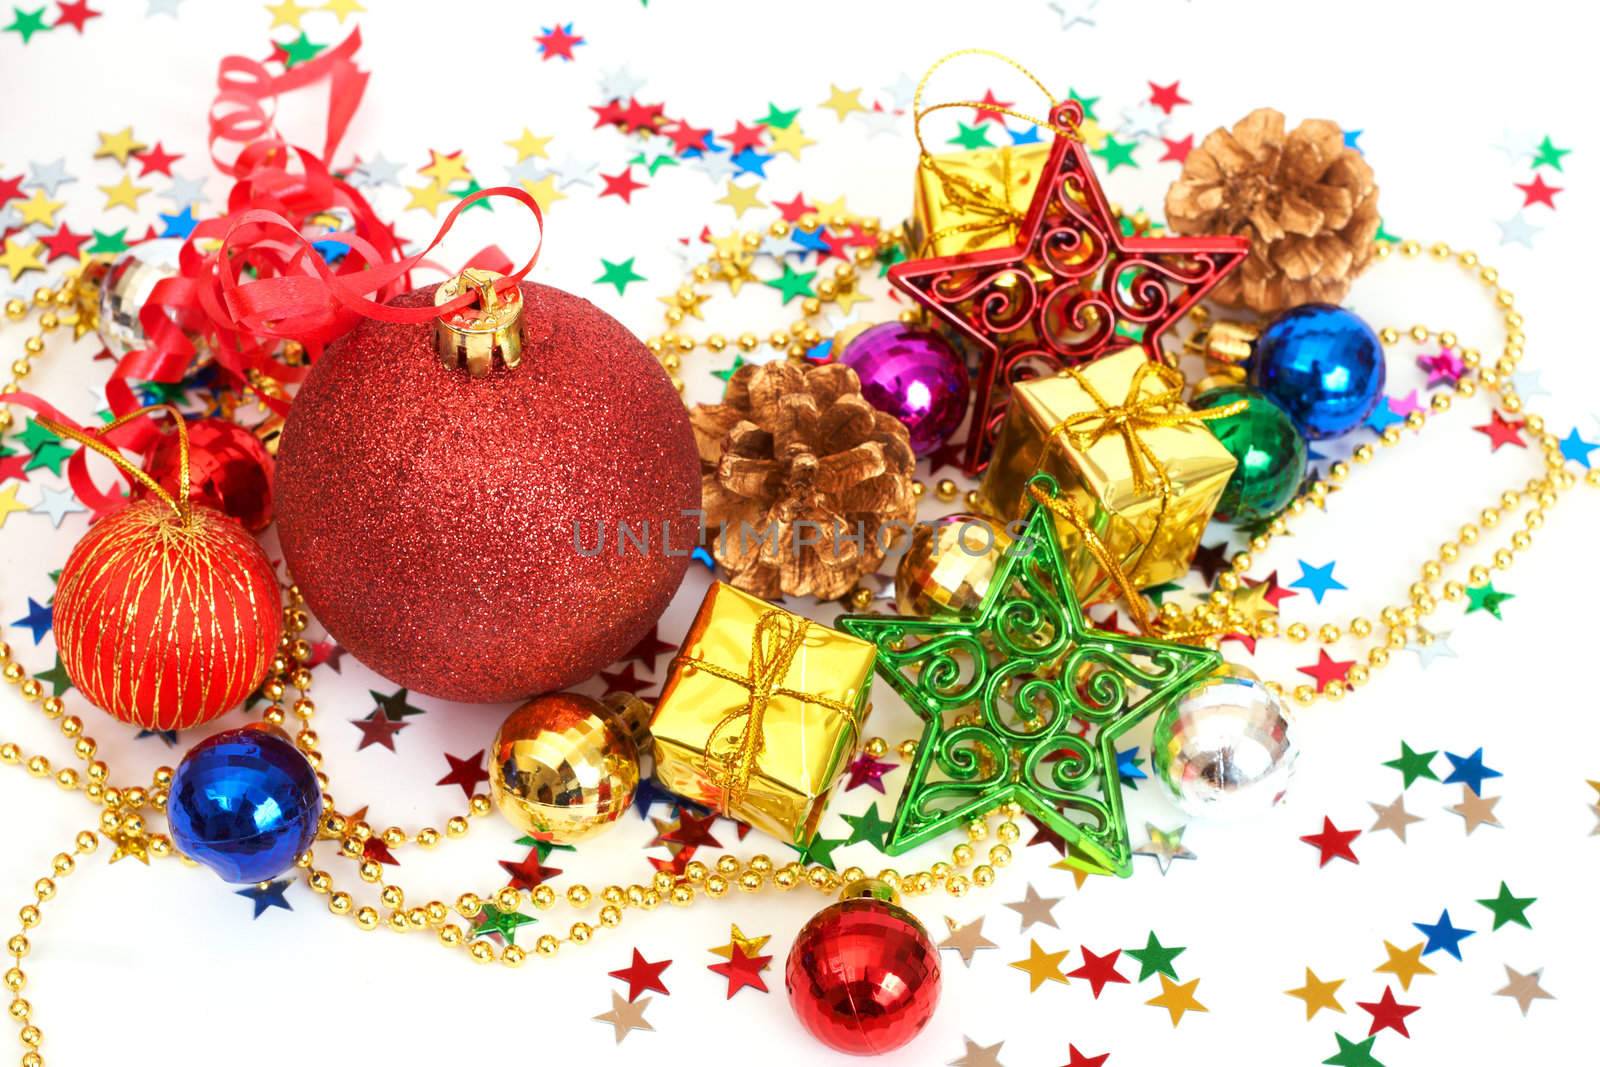 Red Christmas baubles and other decorations with stars on white background with copy space